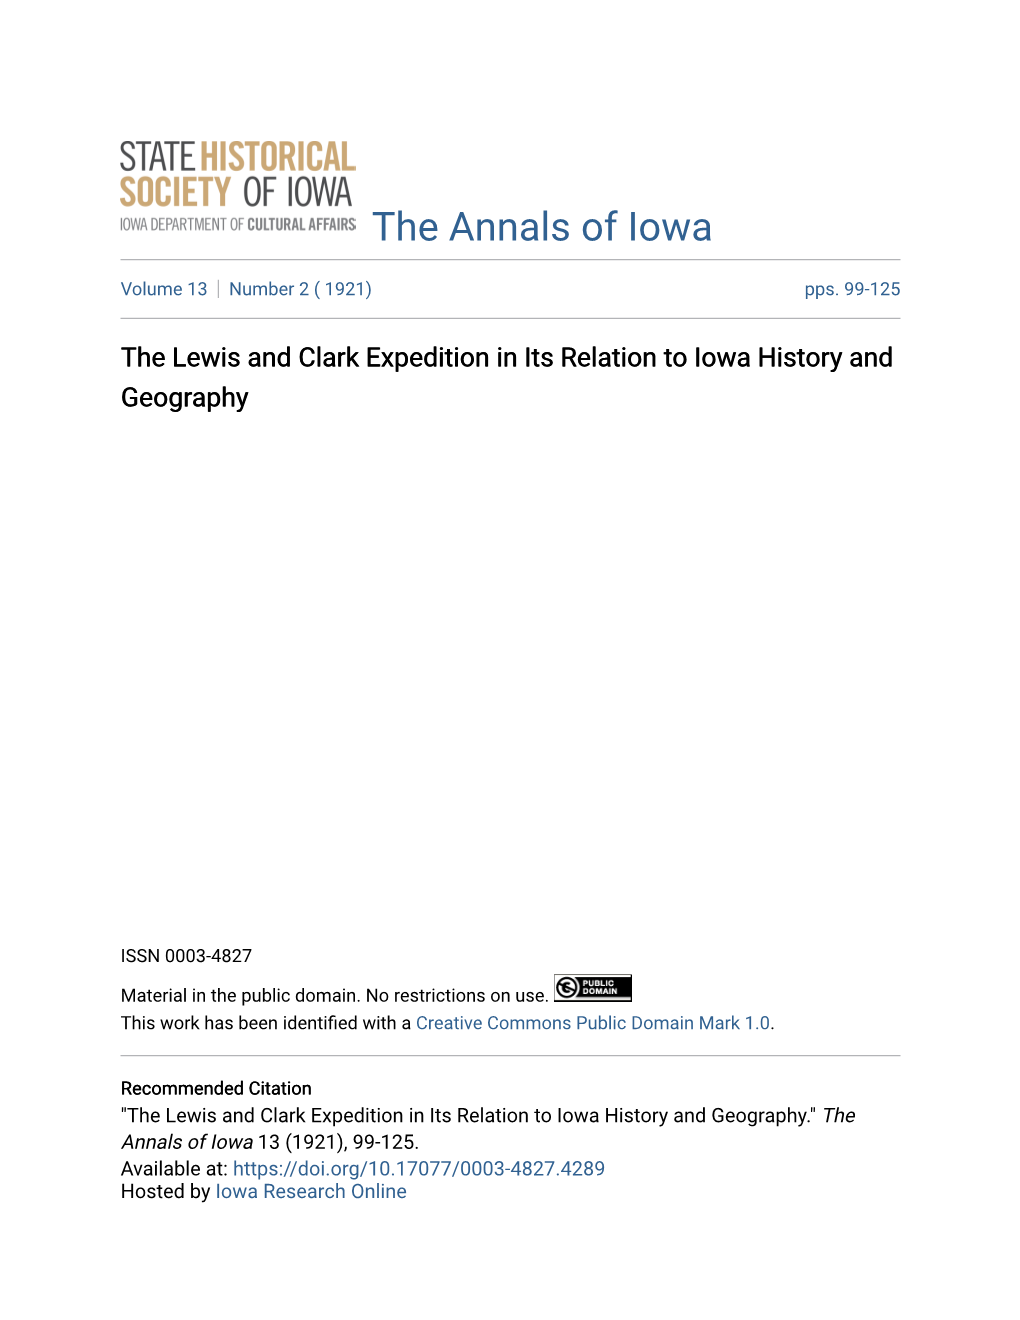 The Lewis and Clark Expedition in Its Relation to Iowa History and Geography